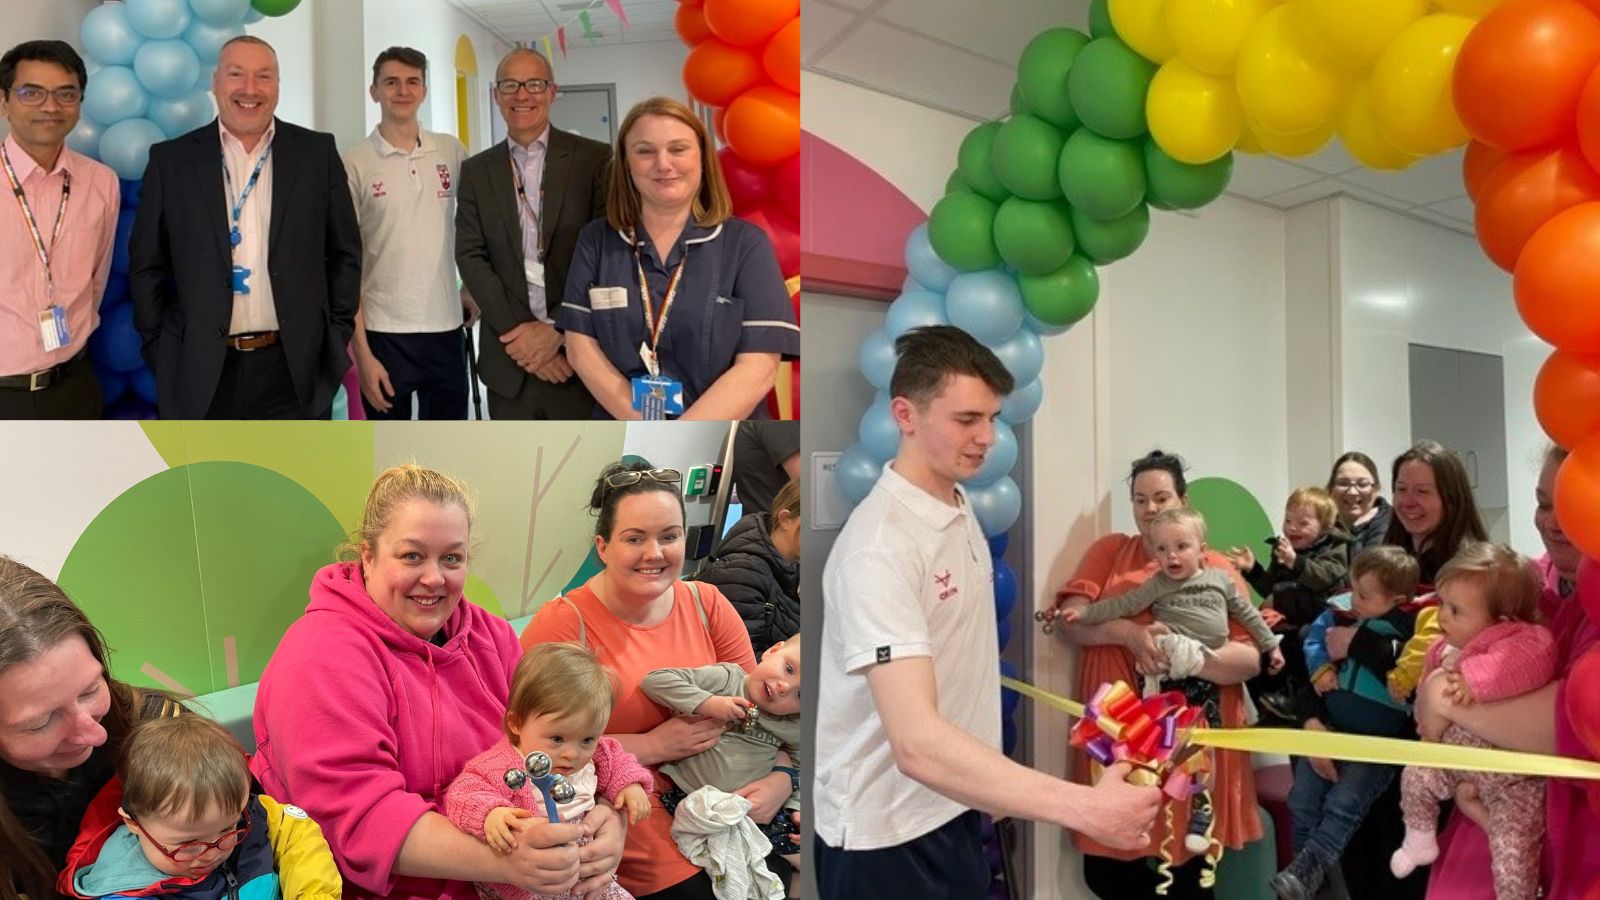 A collage of photos showing guests at the Rainbow Community Hub, featuring families and colleagues. 